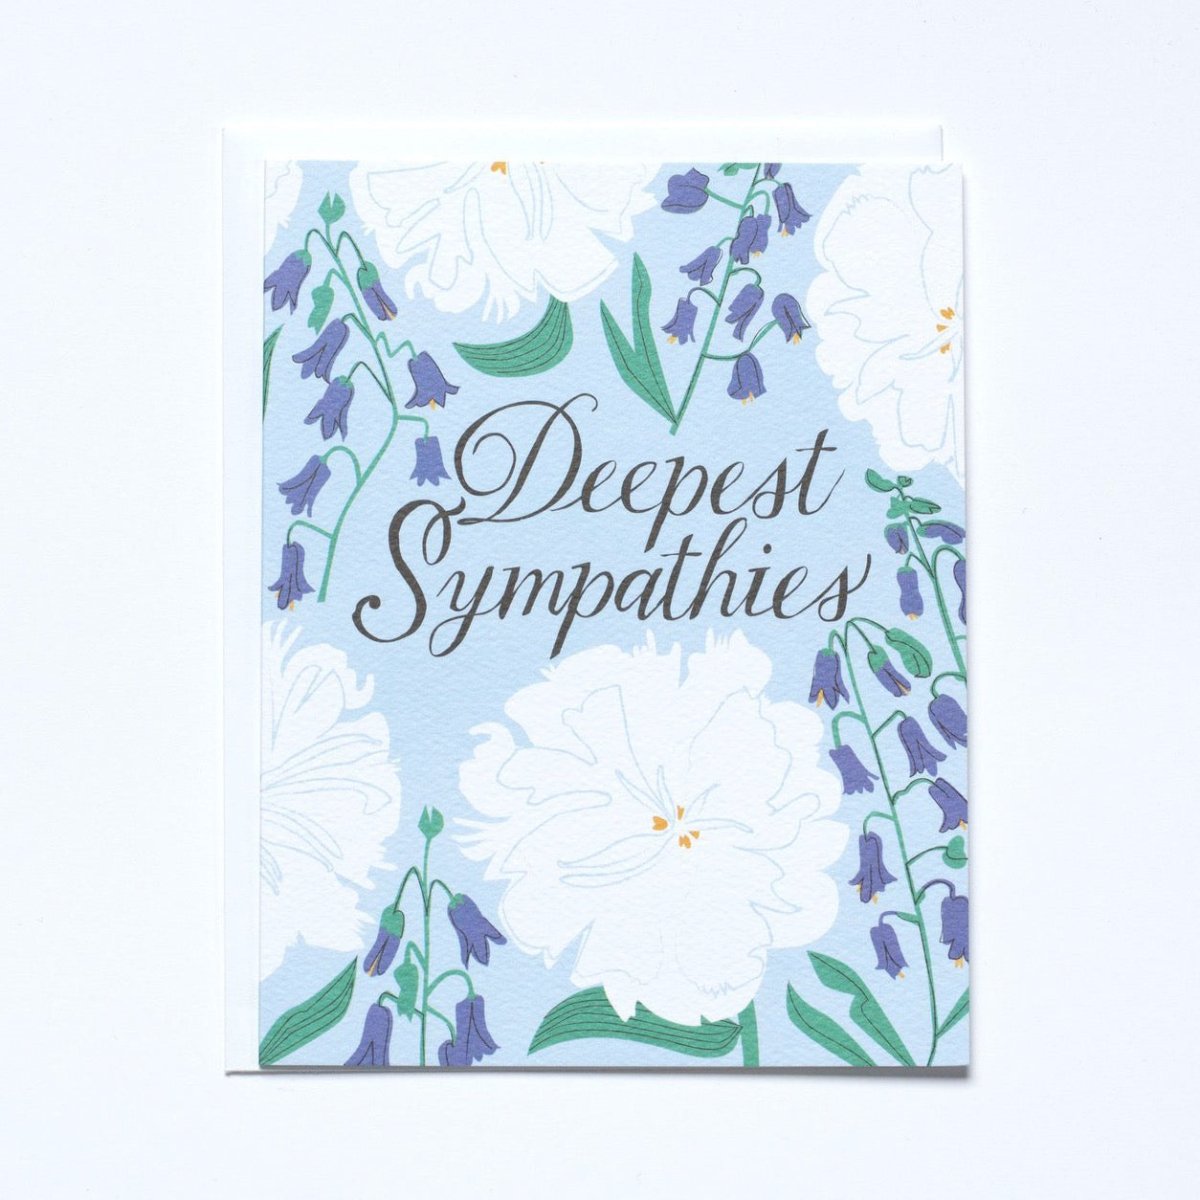 Light blue card with white and blue flowers.  Message reads "DEEPEST SYMPATHIES." Made with recycled paper by Banquet Atelier in Vancouver, British Columbia, Canada.